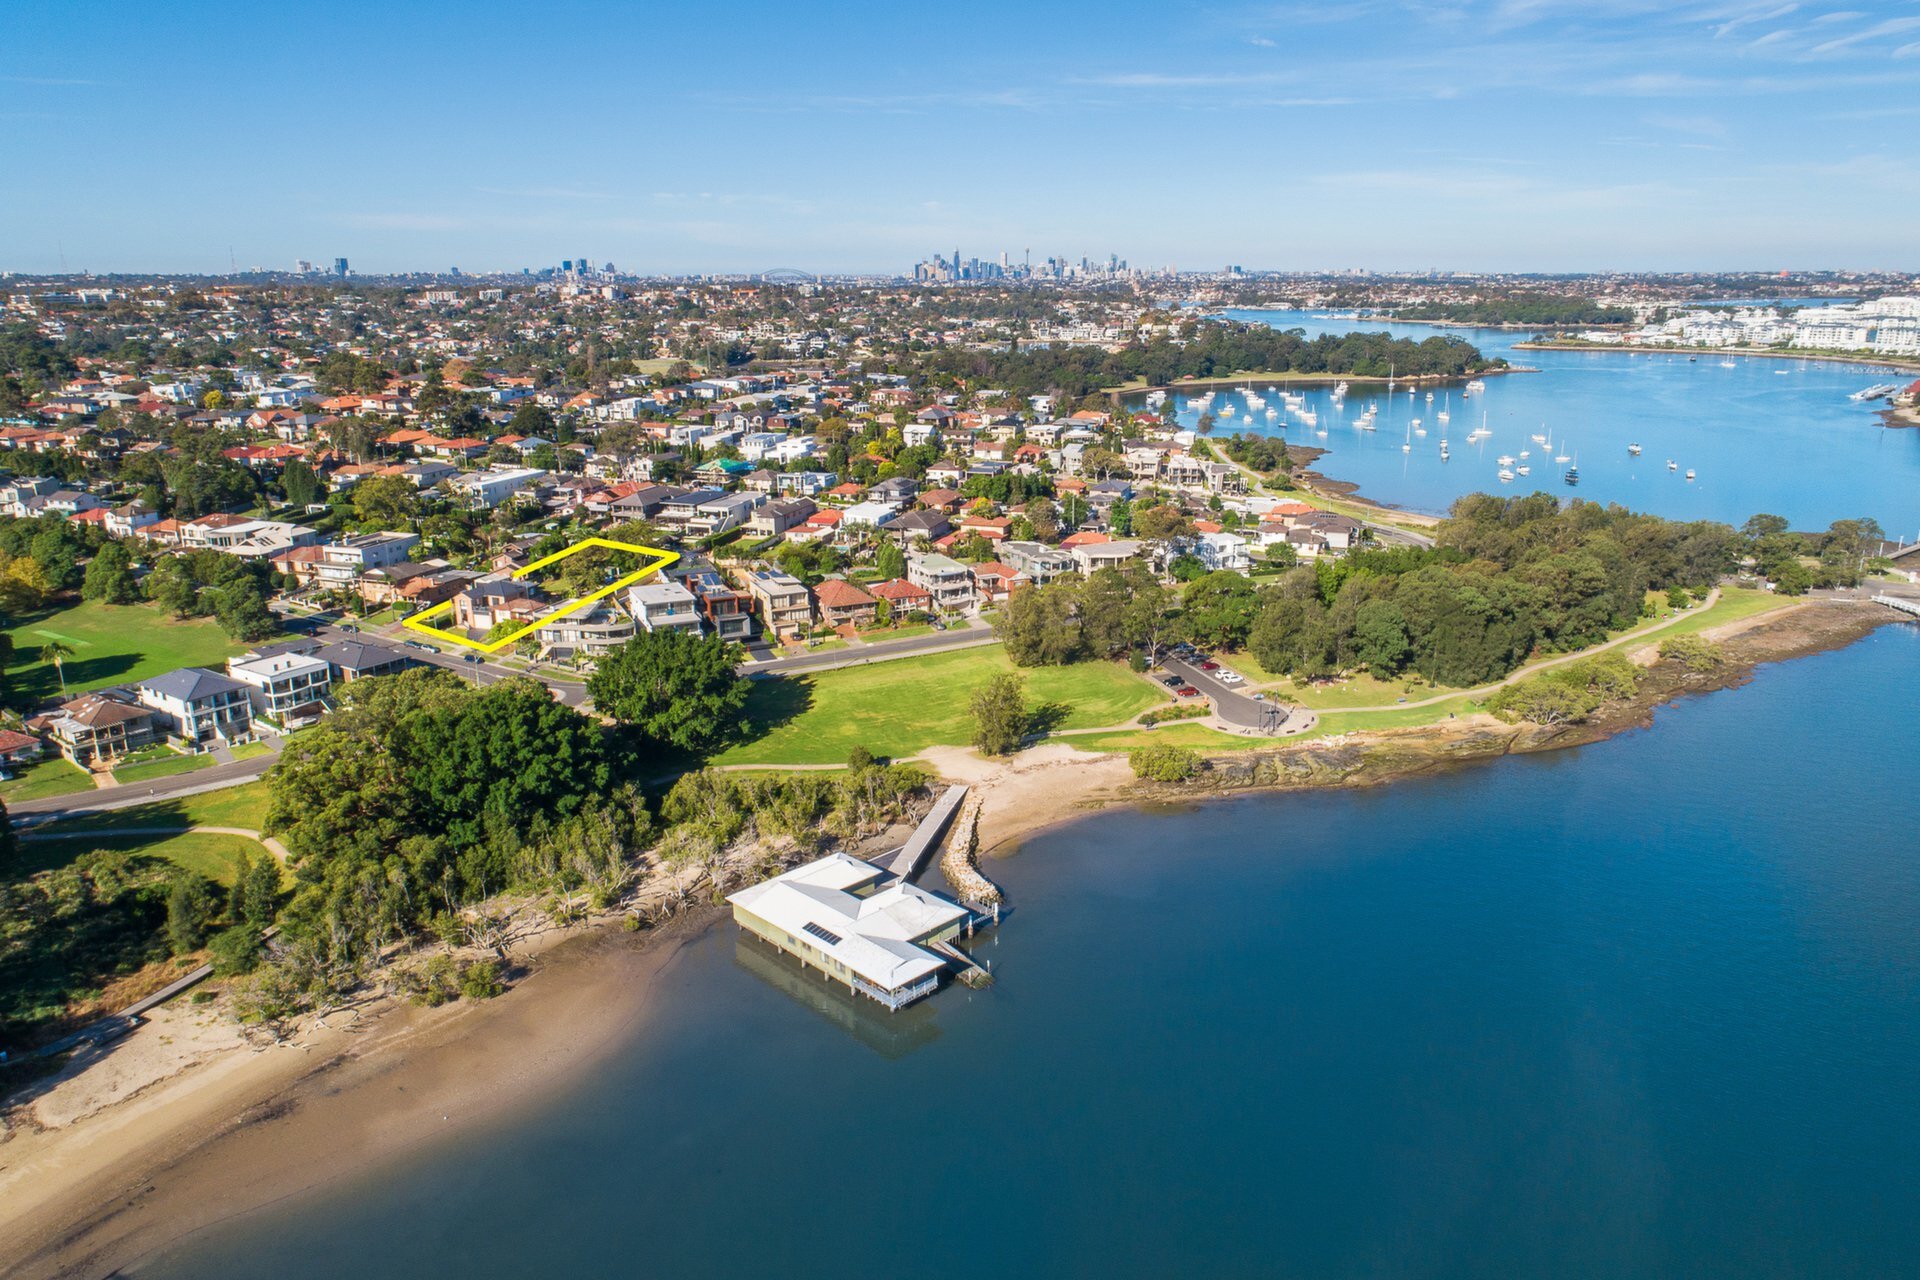 76 Douglas Street, Putney Sold by Cassidy Real Estate - image 1